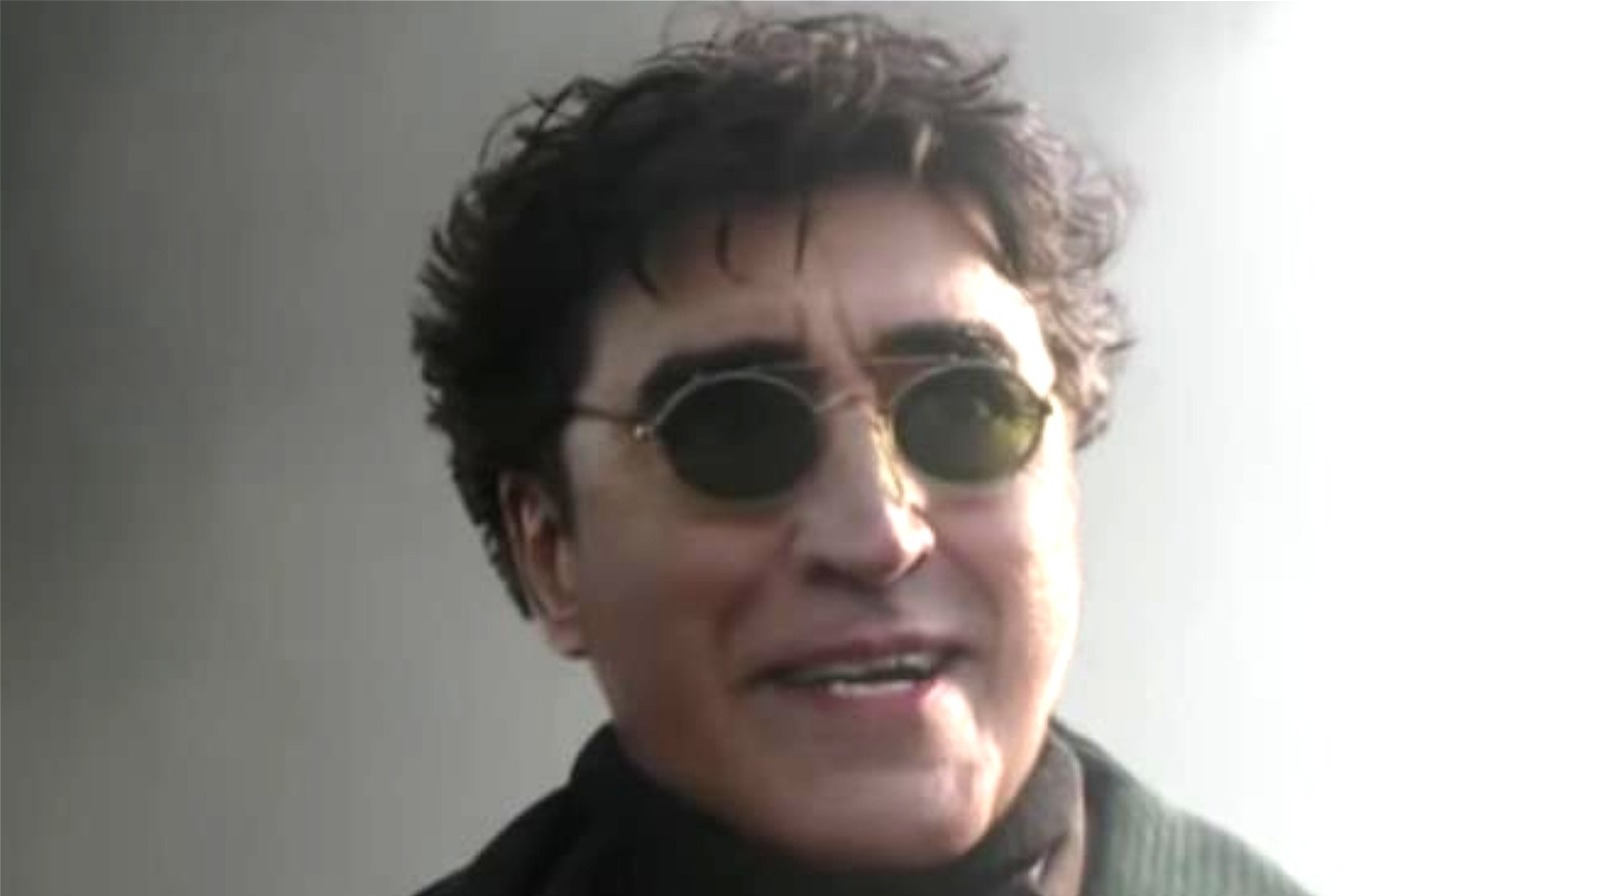 Alfred Molina Returning As Doctor Octopus For The Next MCU Spider